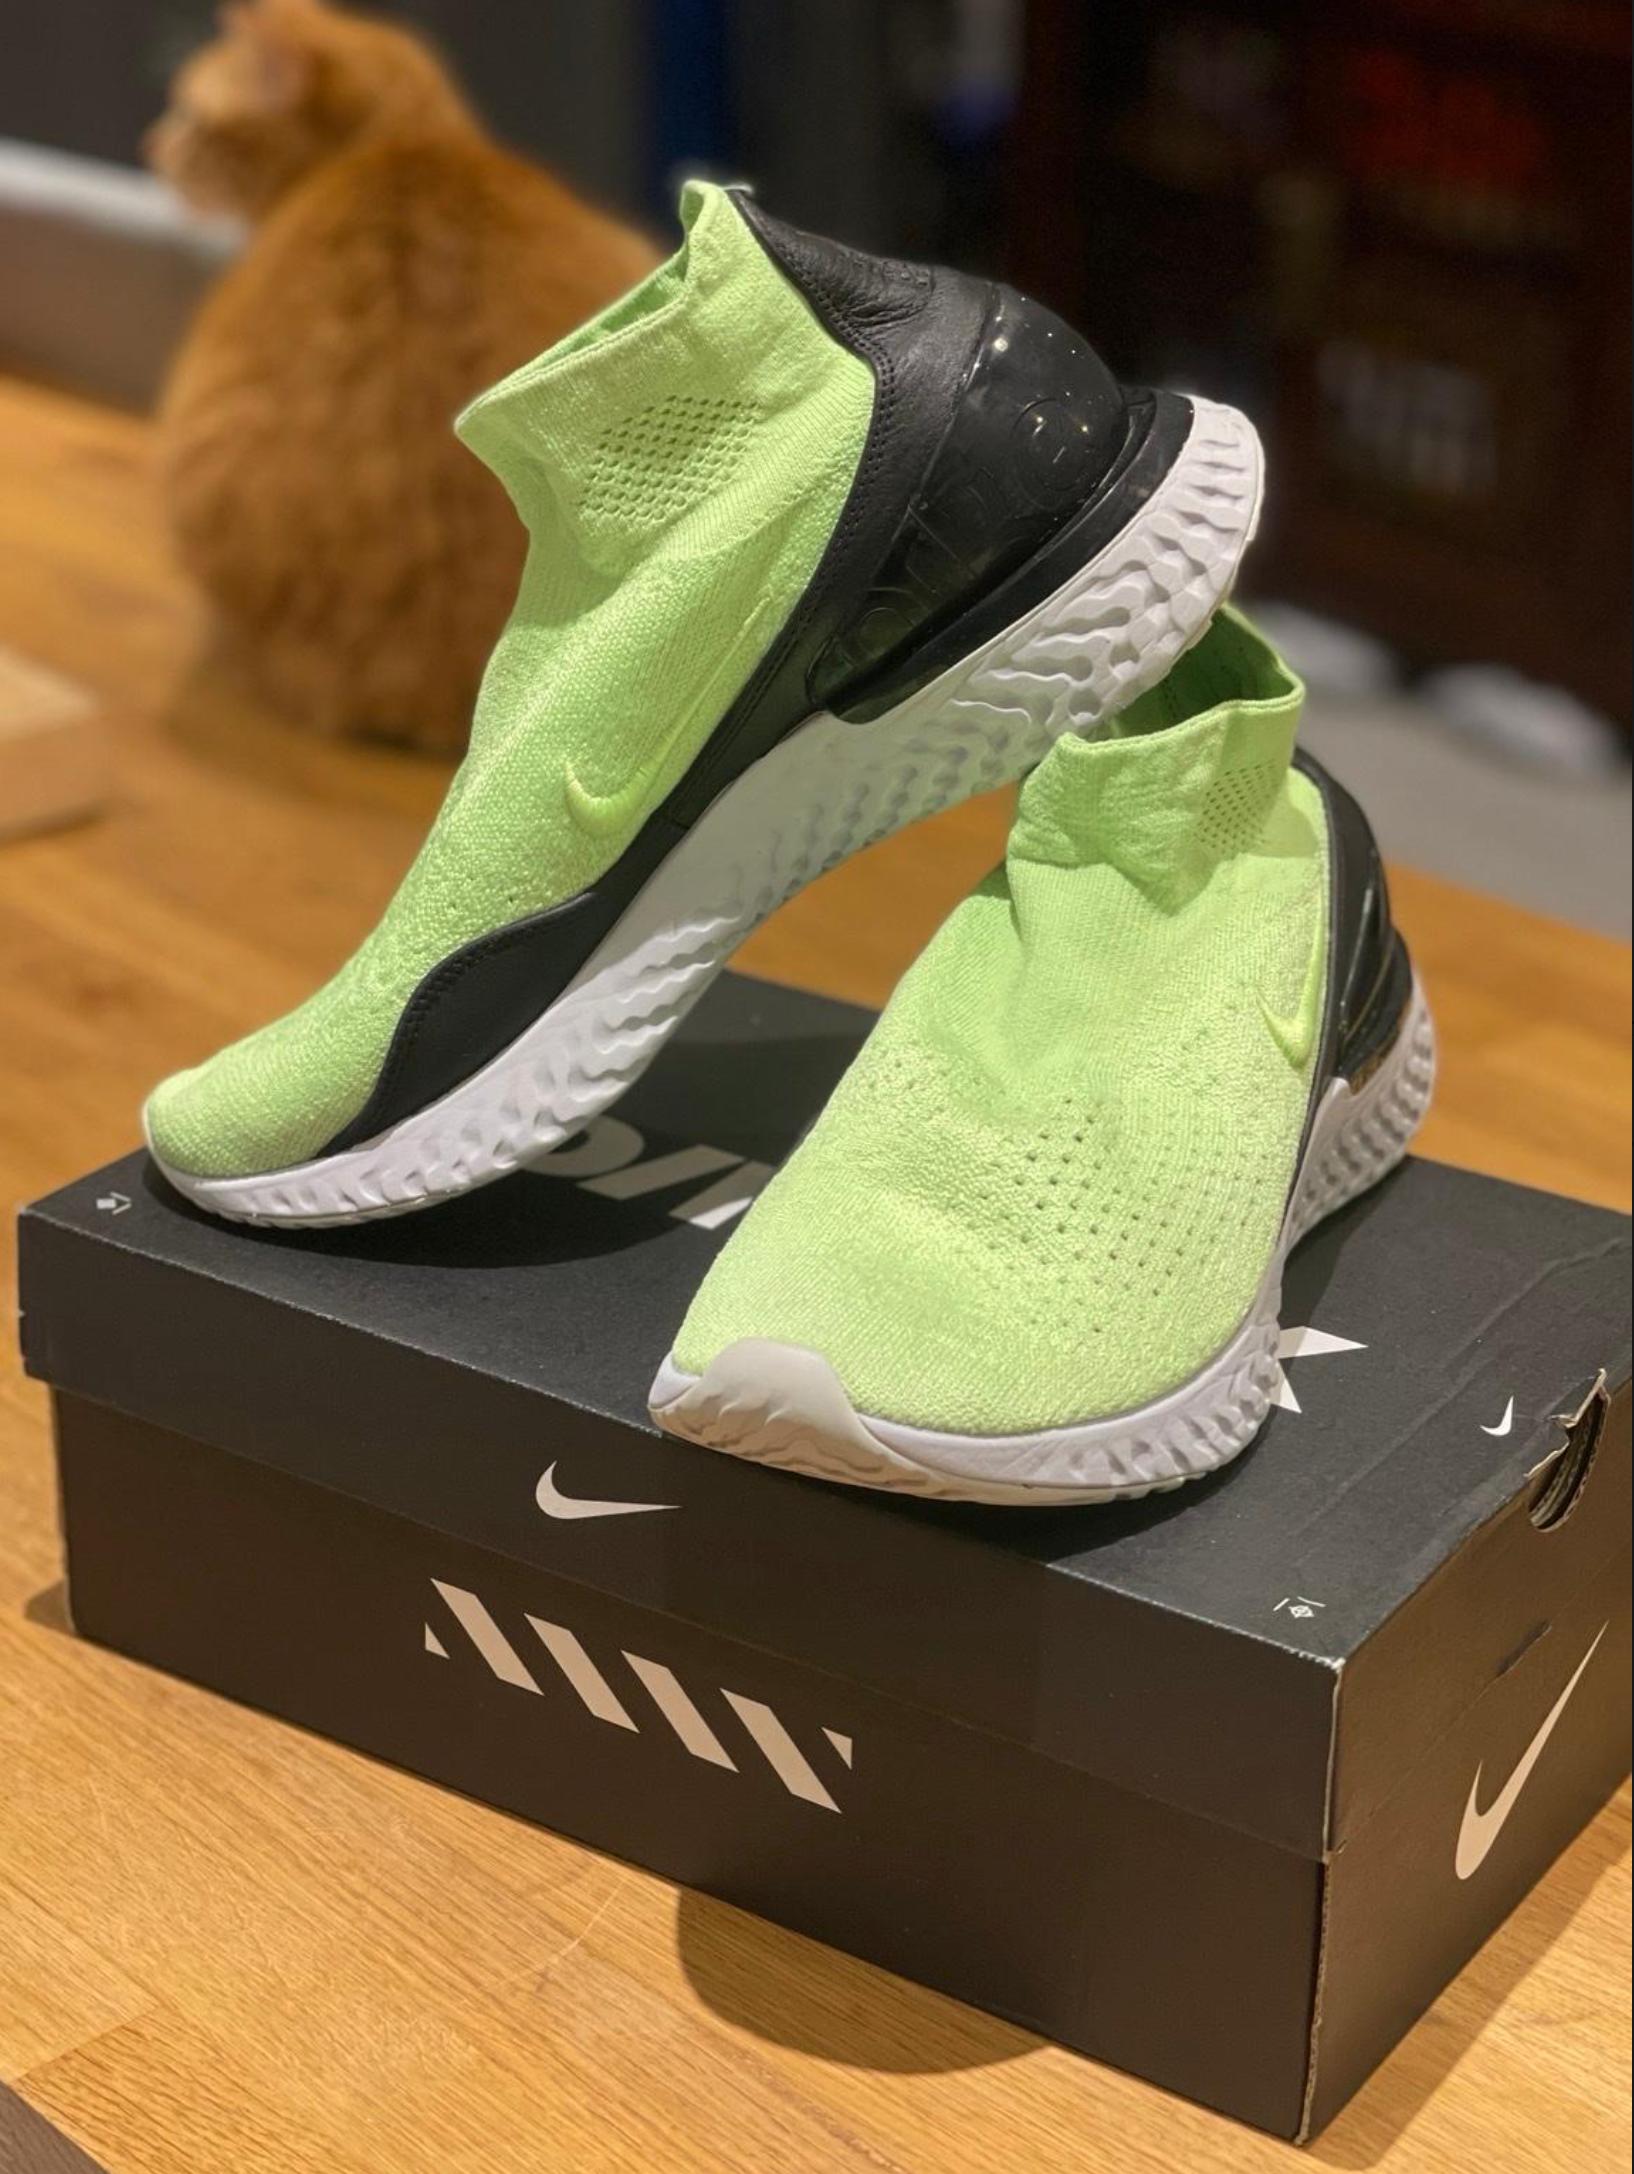 Nike Rise React Flynit Volt Trainer UK8.5 in NW9 London for £80.00 for ...